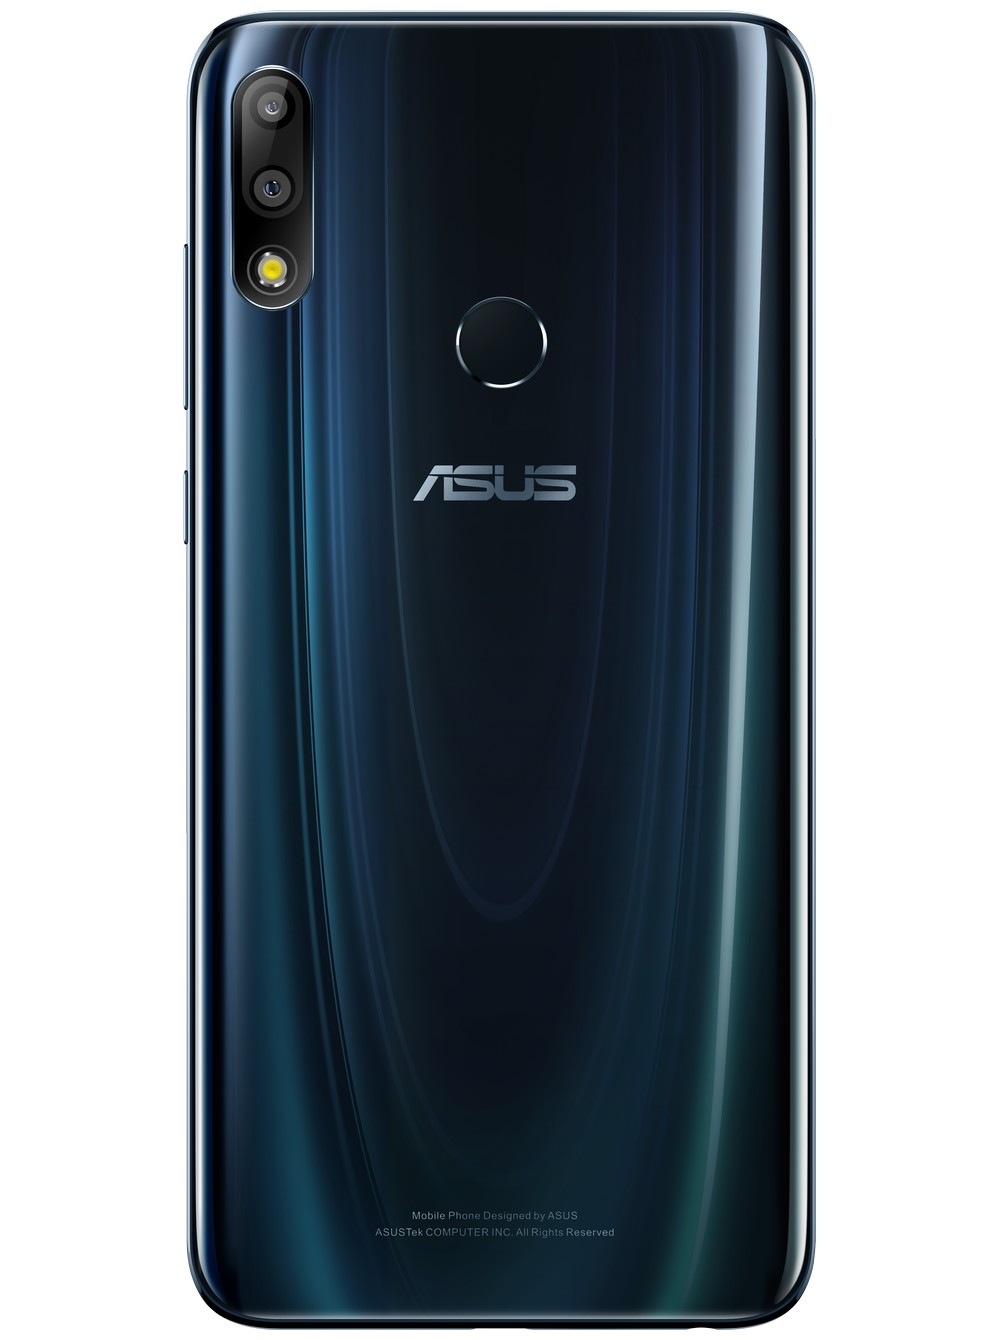 Asus Zenfone Max M2 and Zenfone Max Pro M2 officially :: GSMchoice.com